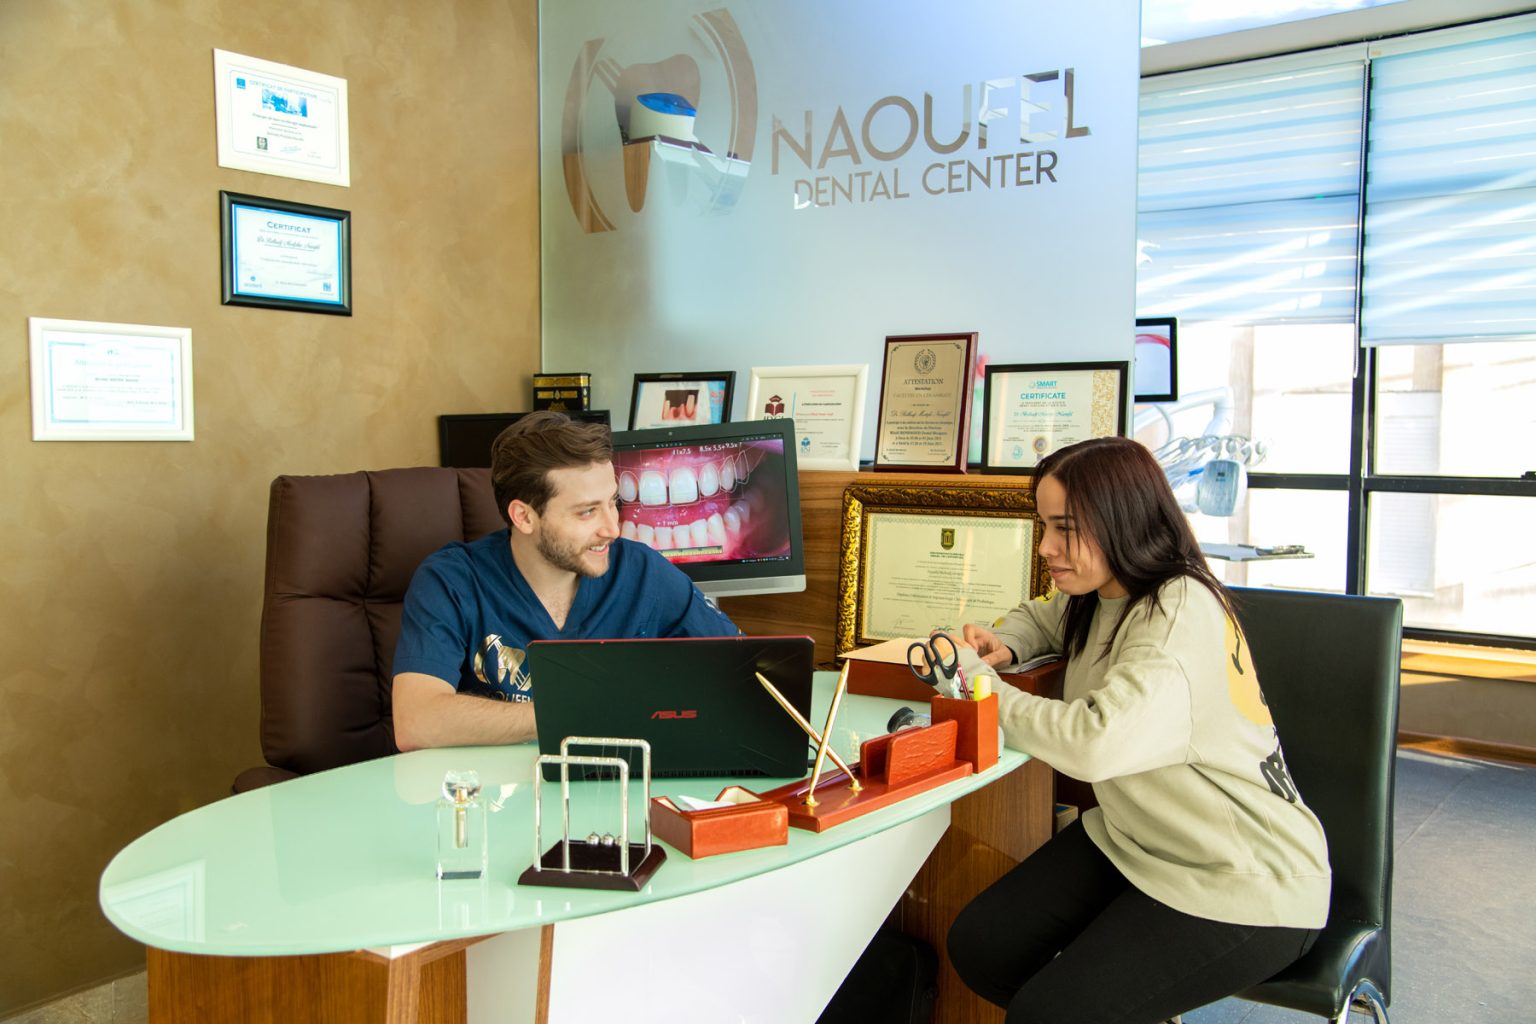 A dentist consultation with a patient in Algeria, at Naoufel Dental Center, a Dental clinic in Algeria, Constantine